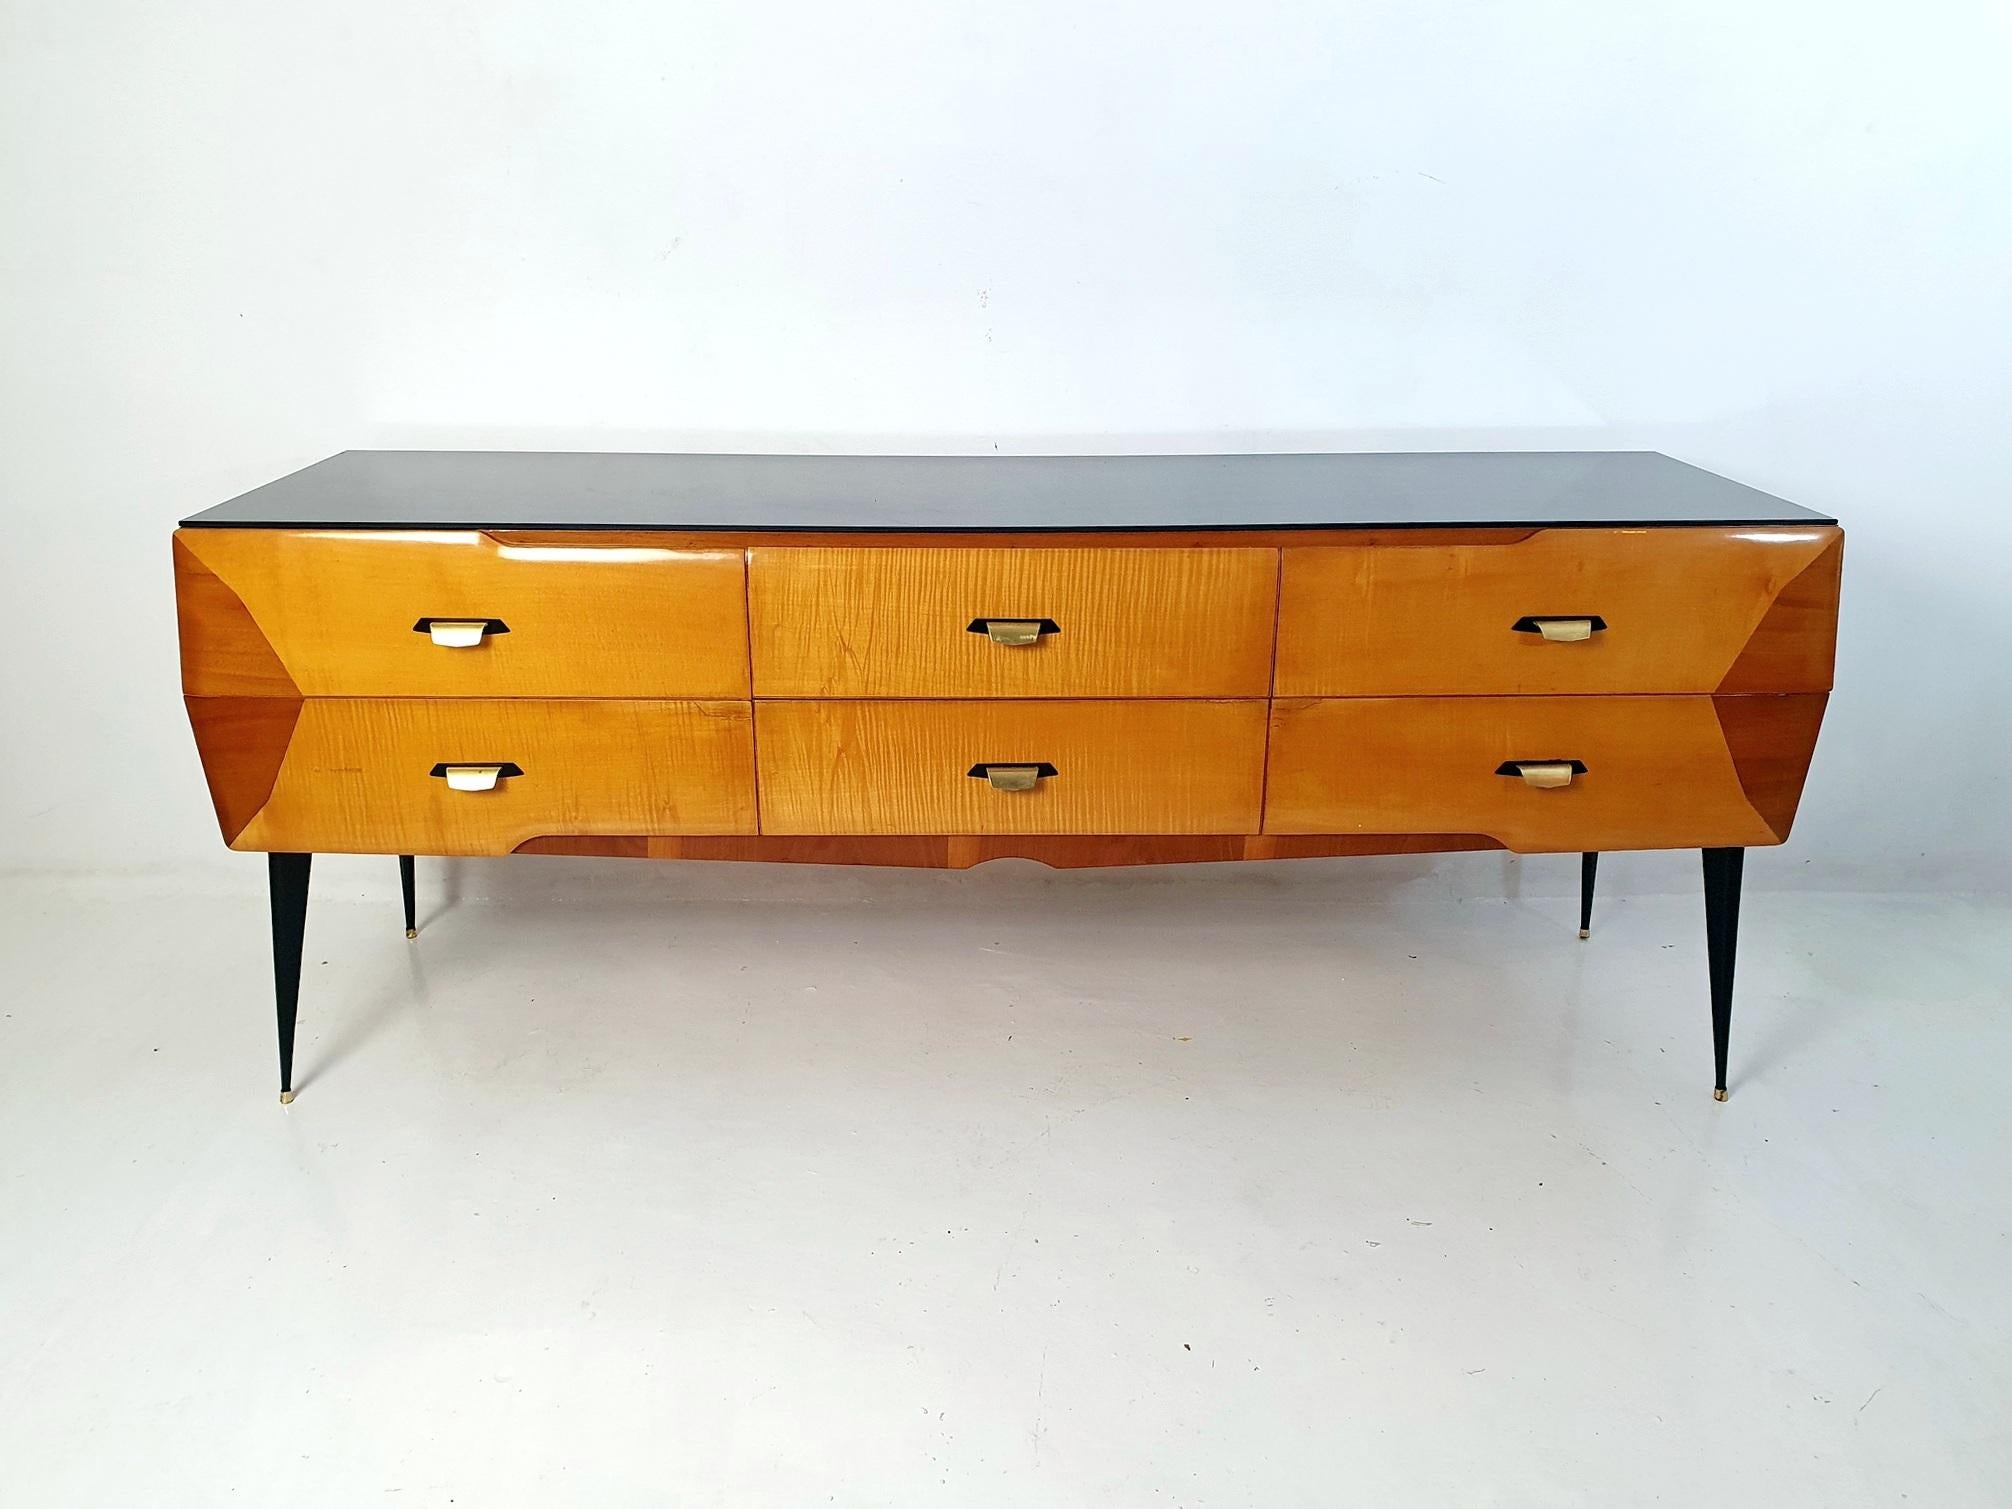 This Italian midcentury credenza, reminiscent of the iconic style of Gio Ponti, exudes innovation and sophistication. Crafted with lightweight materials, the piece showcases four beveled drawers made from maple and walnut. In combination with it's